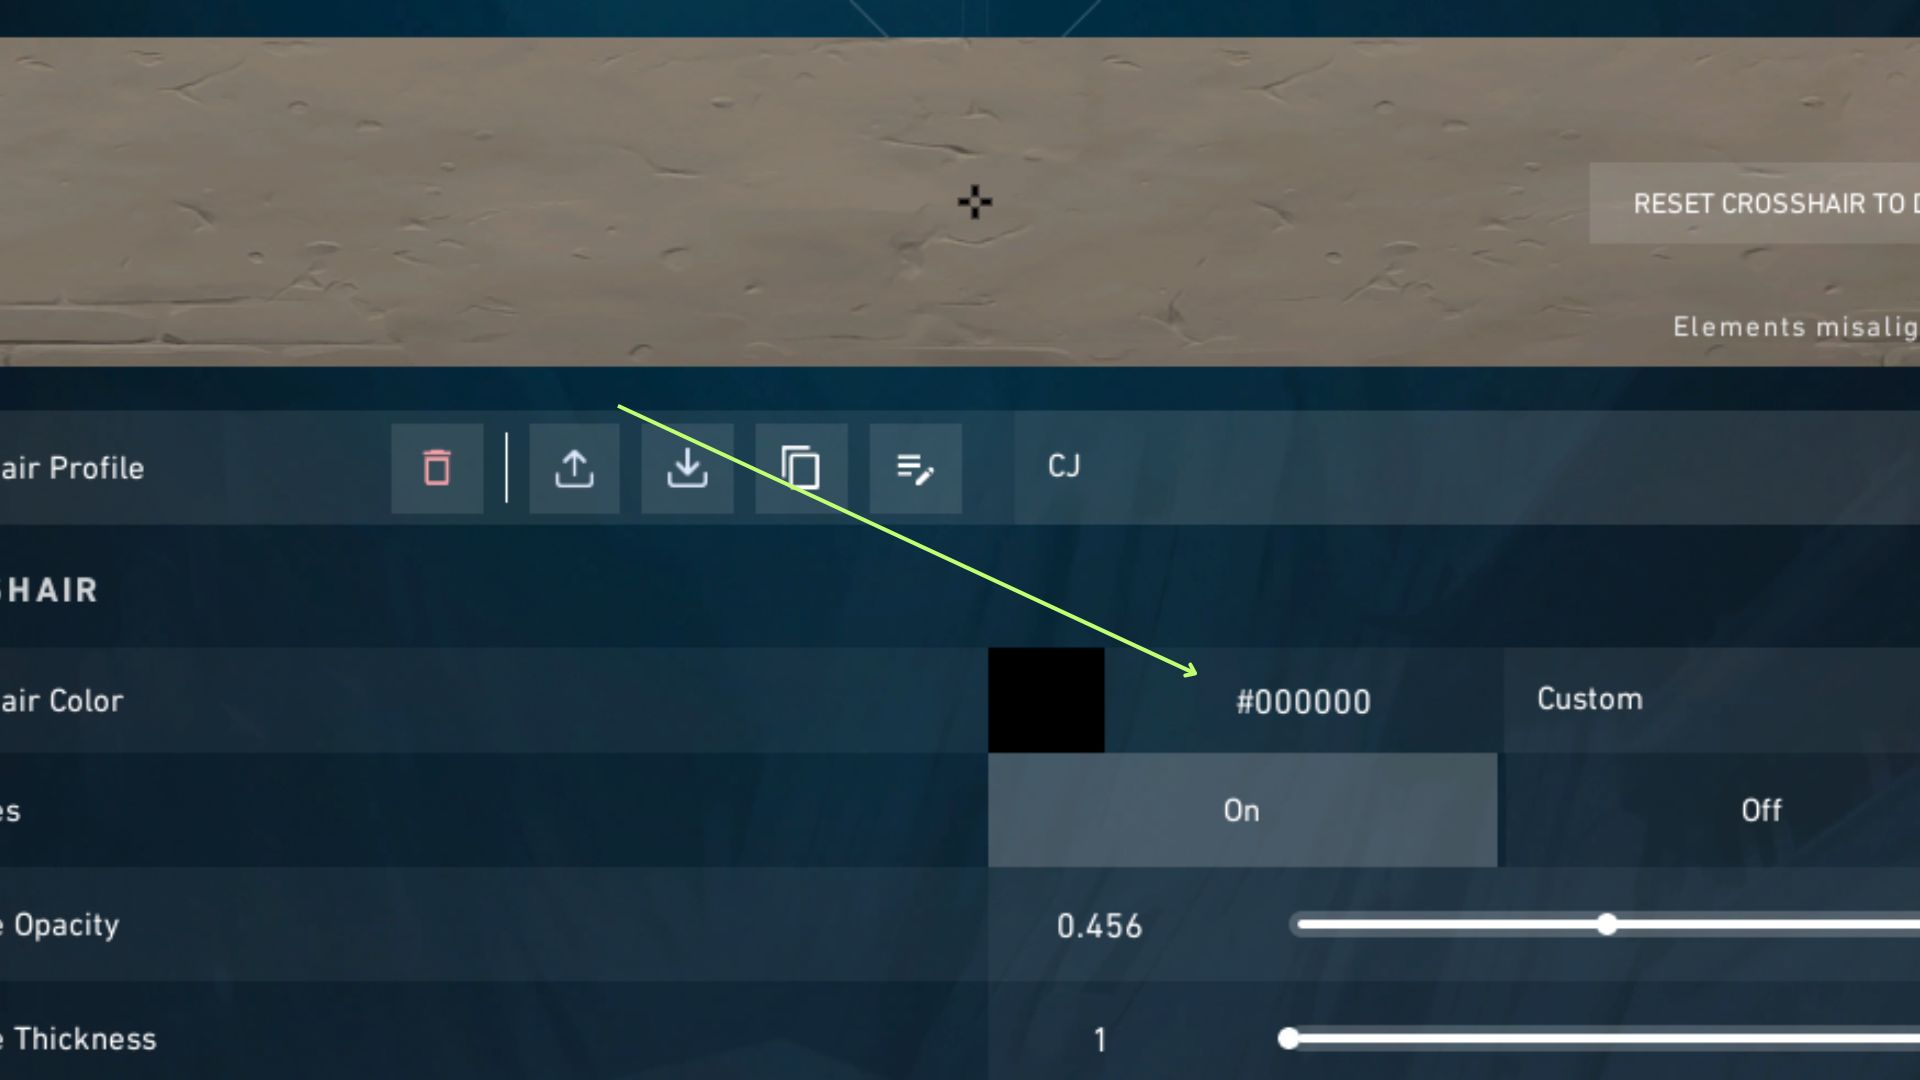 Change the color code to get a black crosshair.